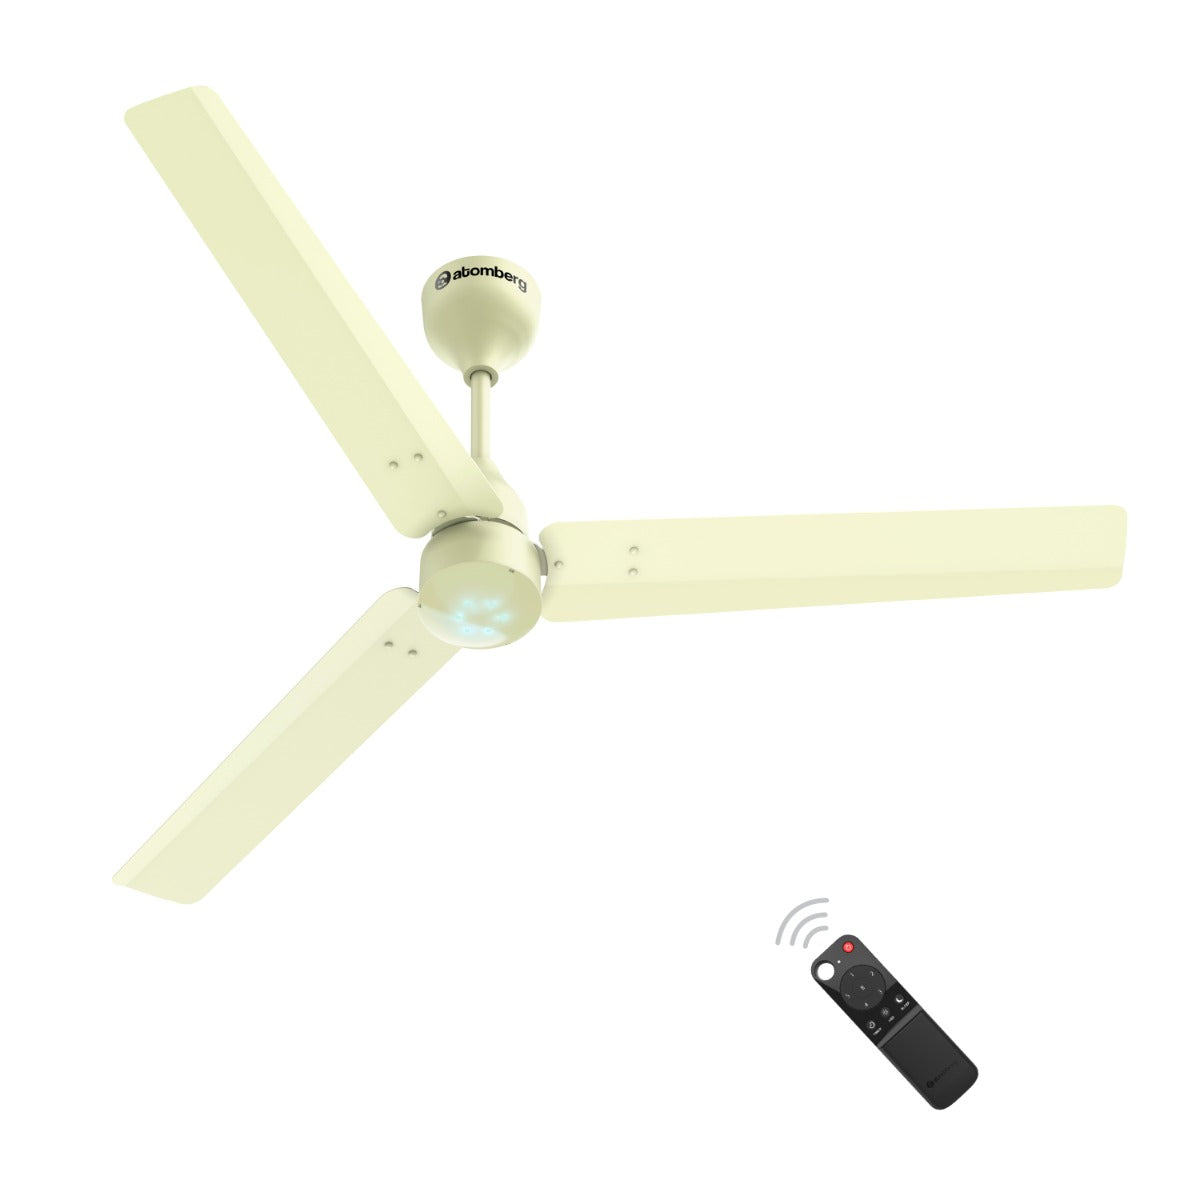 Atomberg Renesa 1200 mm BLDC Motor with Remote 3 Blade Ceiling Fan Ivory Pack of 1